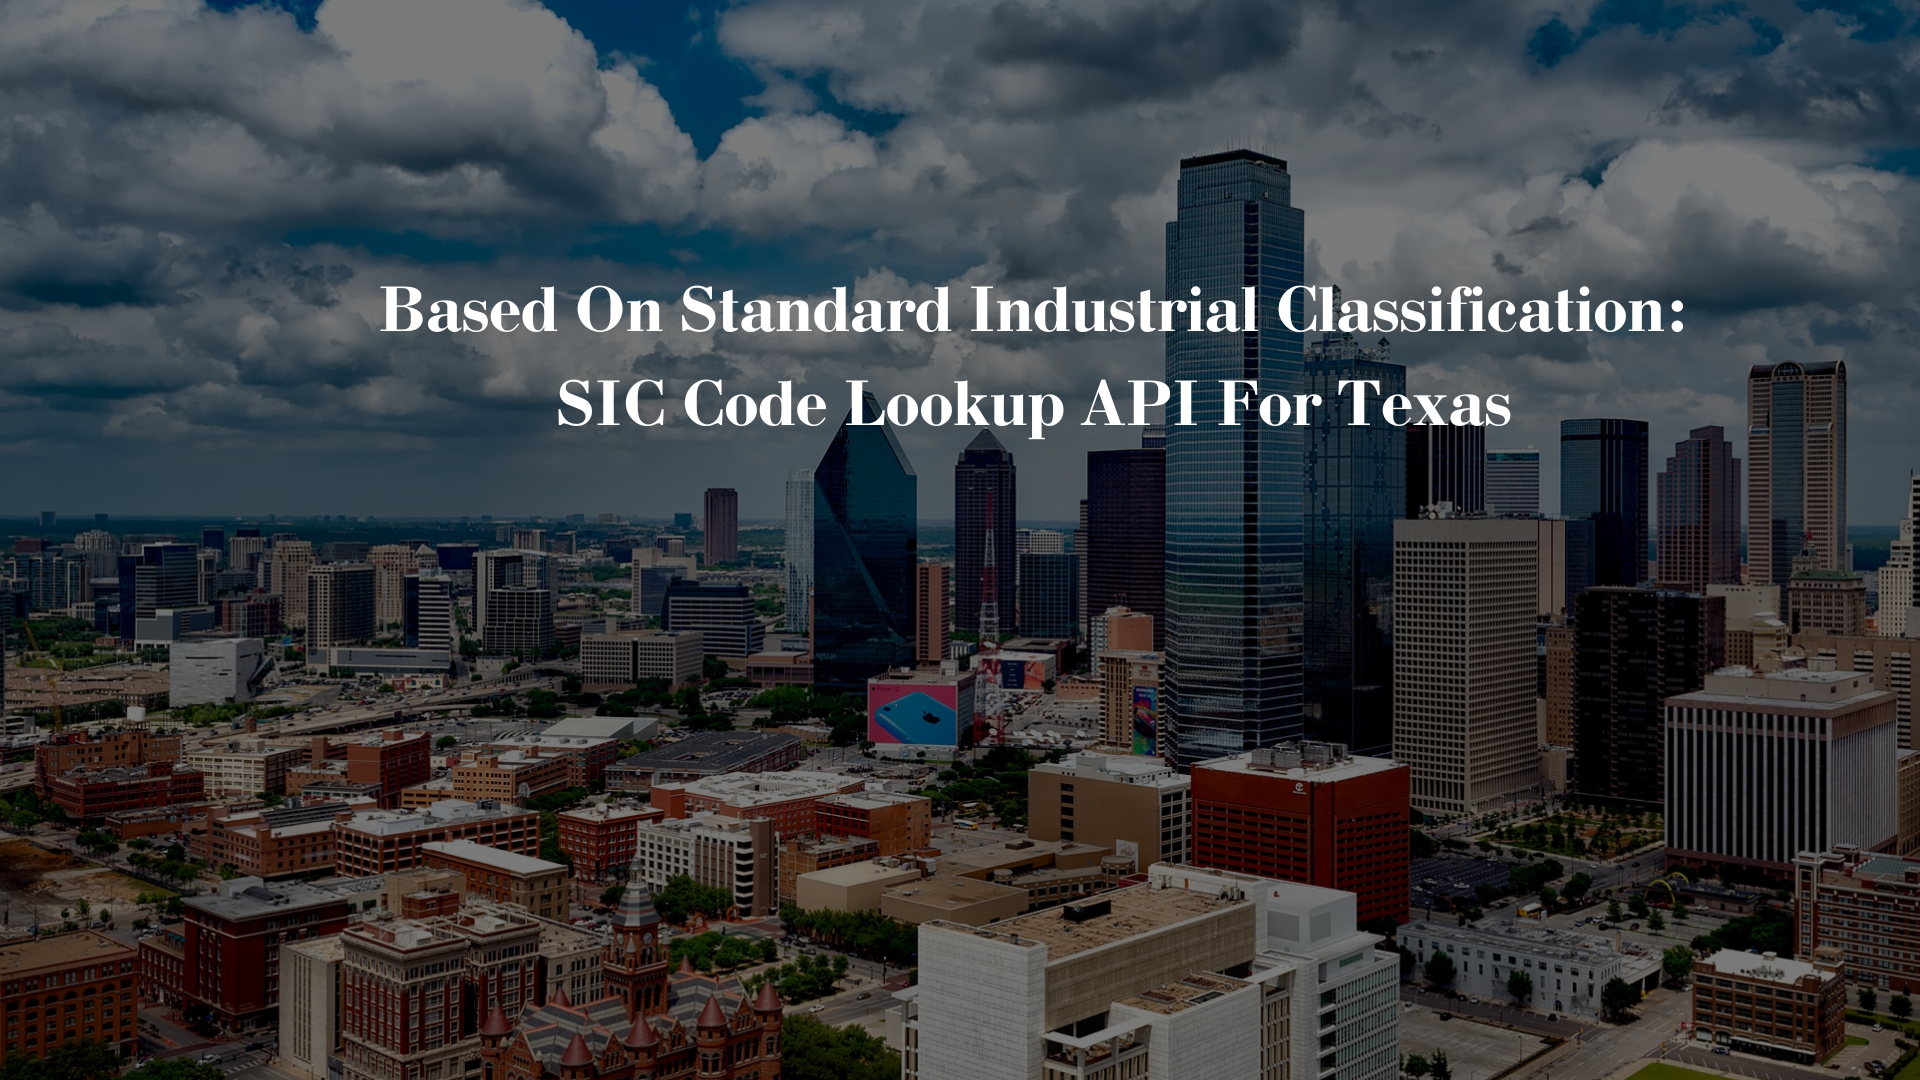 Based On Standard Industrial Classification: SIC Code Lookup API For Texas